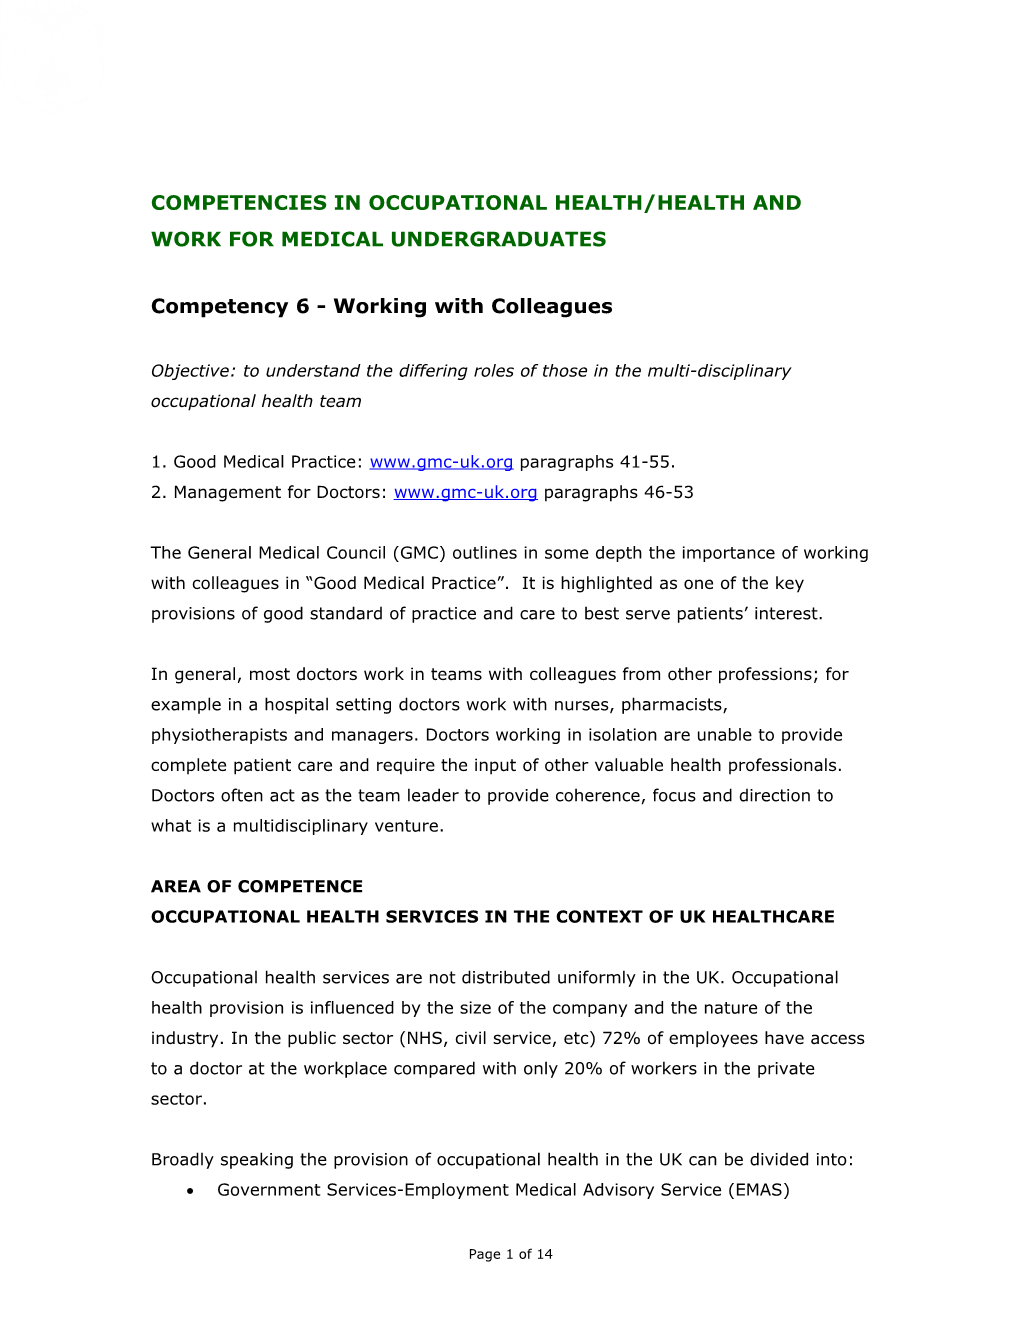 Competencies in Occupational Health/Health and Work for Medical Undergraduates